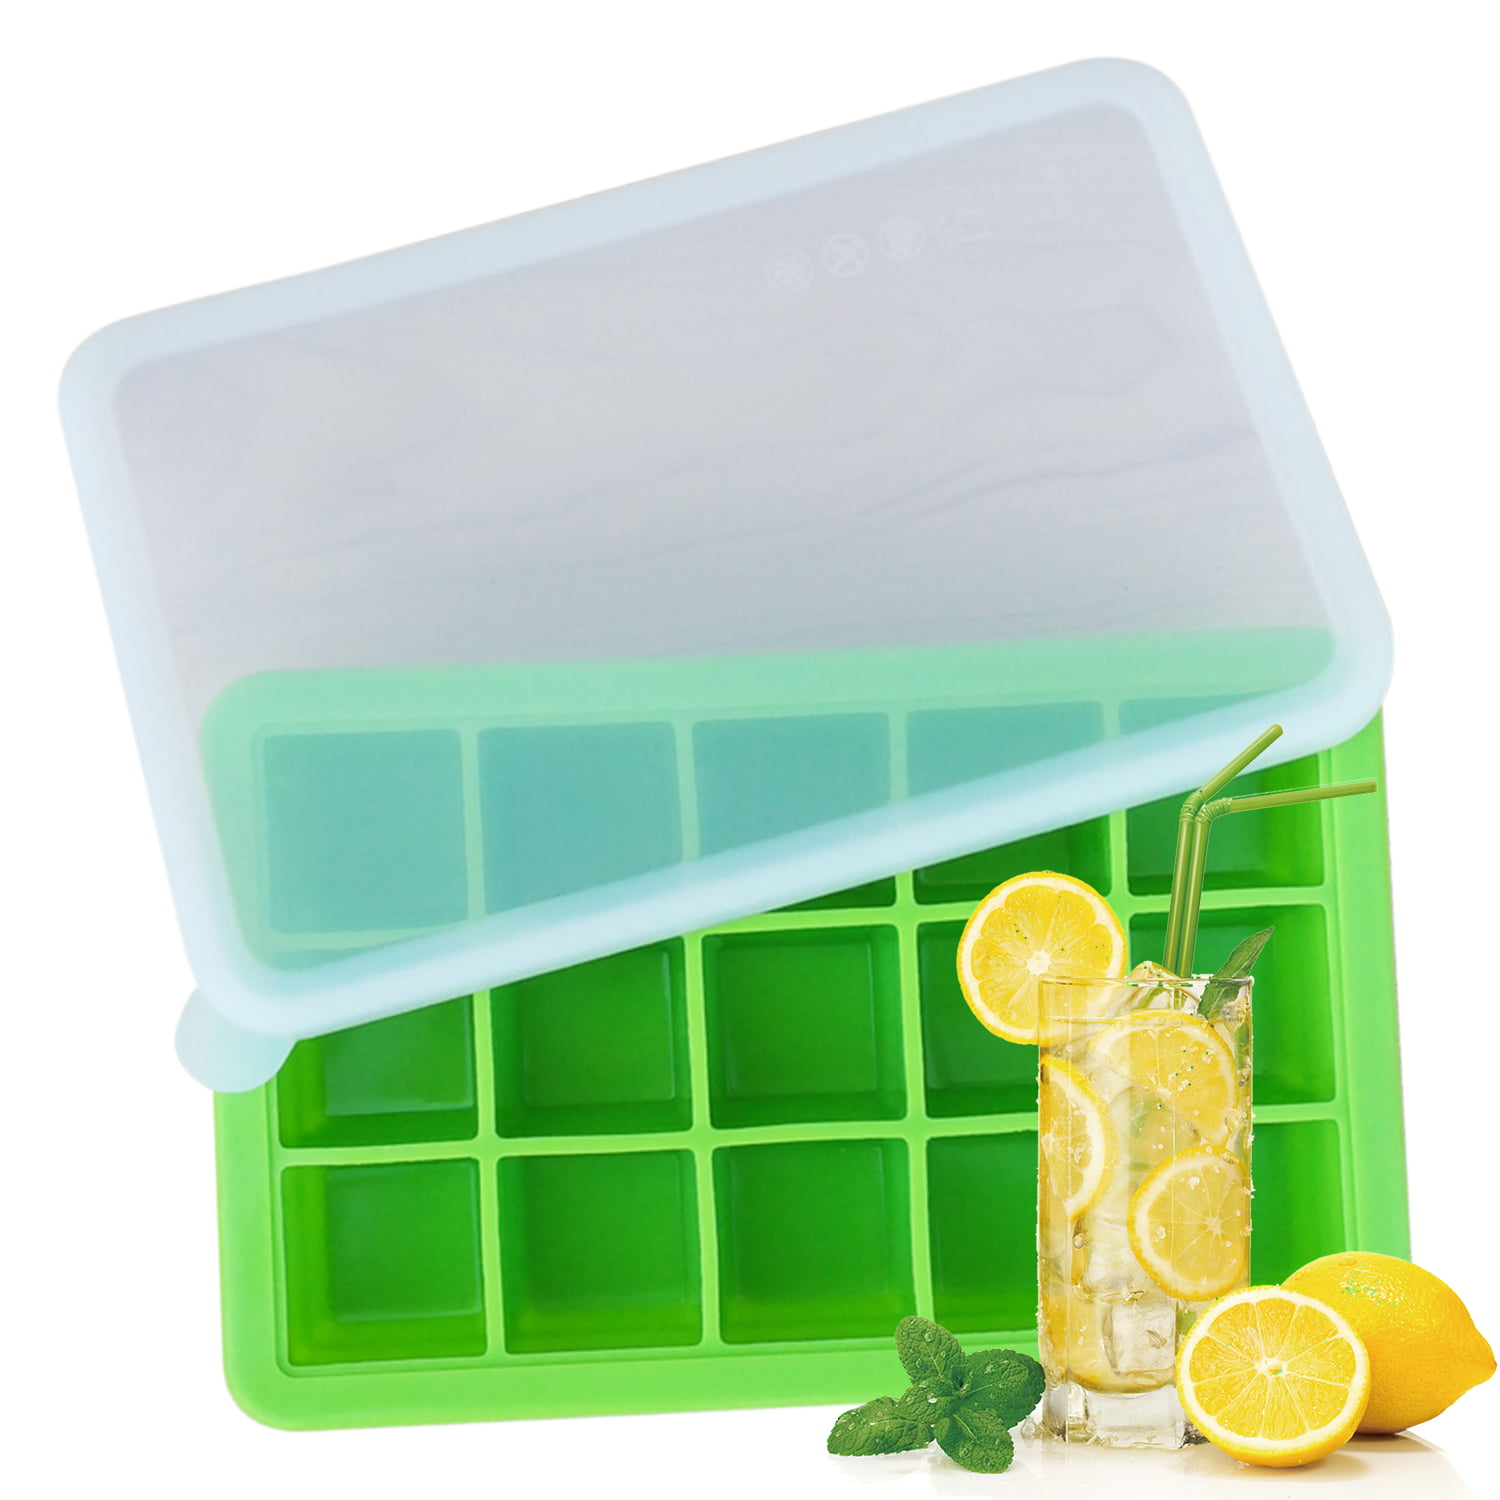 Details about   15 Grids Large Size Silicone Ice Cube Mould Square Mold Tray DIY Moulds Tools 